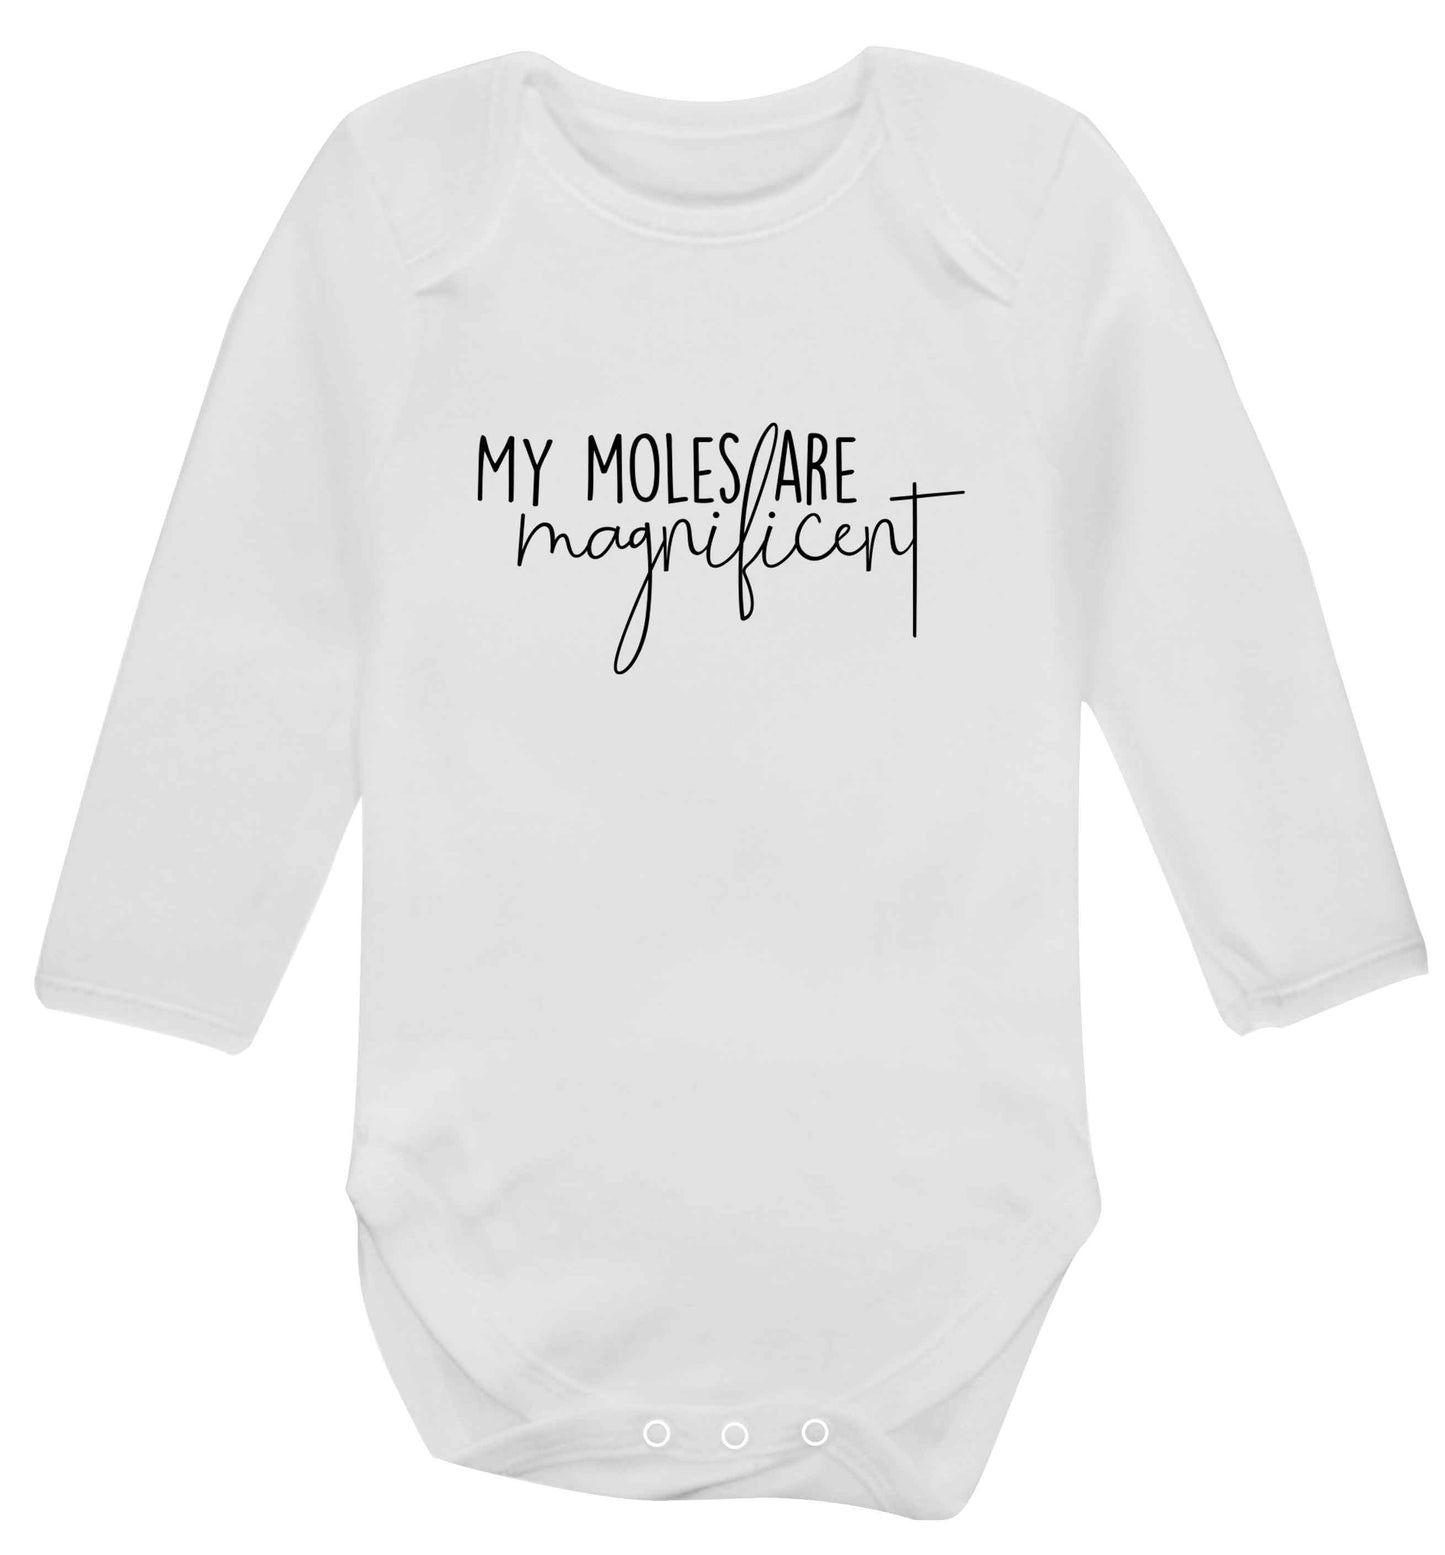 My moles are magnificent baby vest long sleeved white 6-12 months